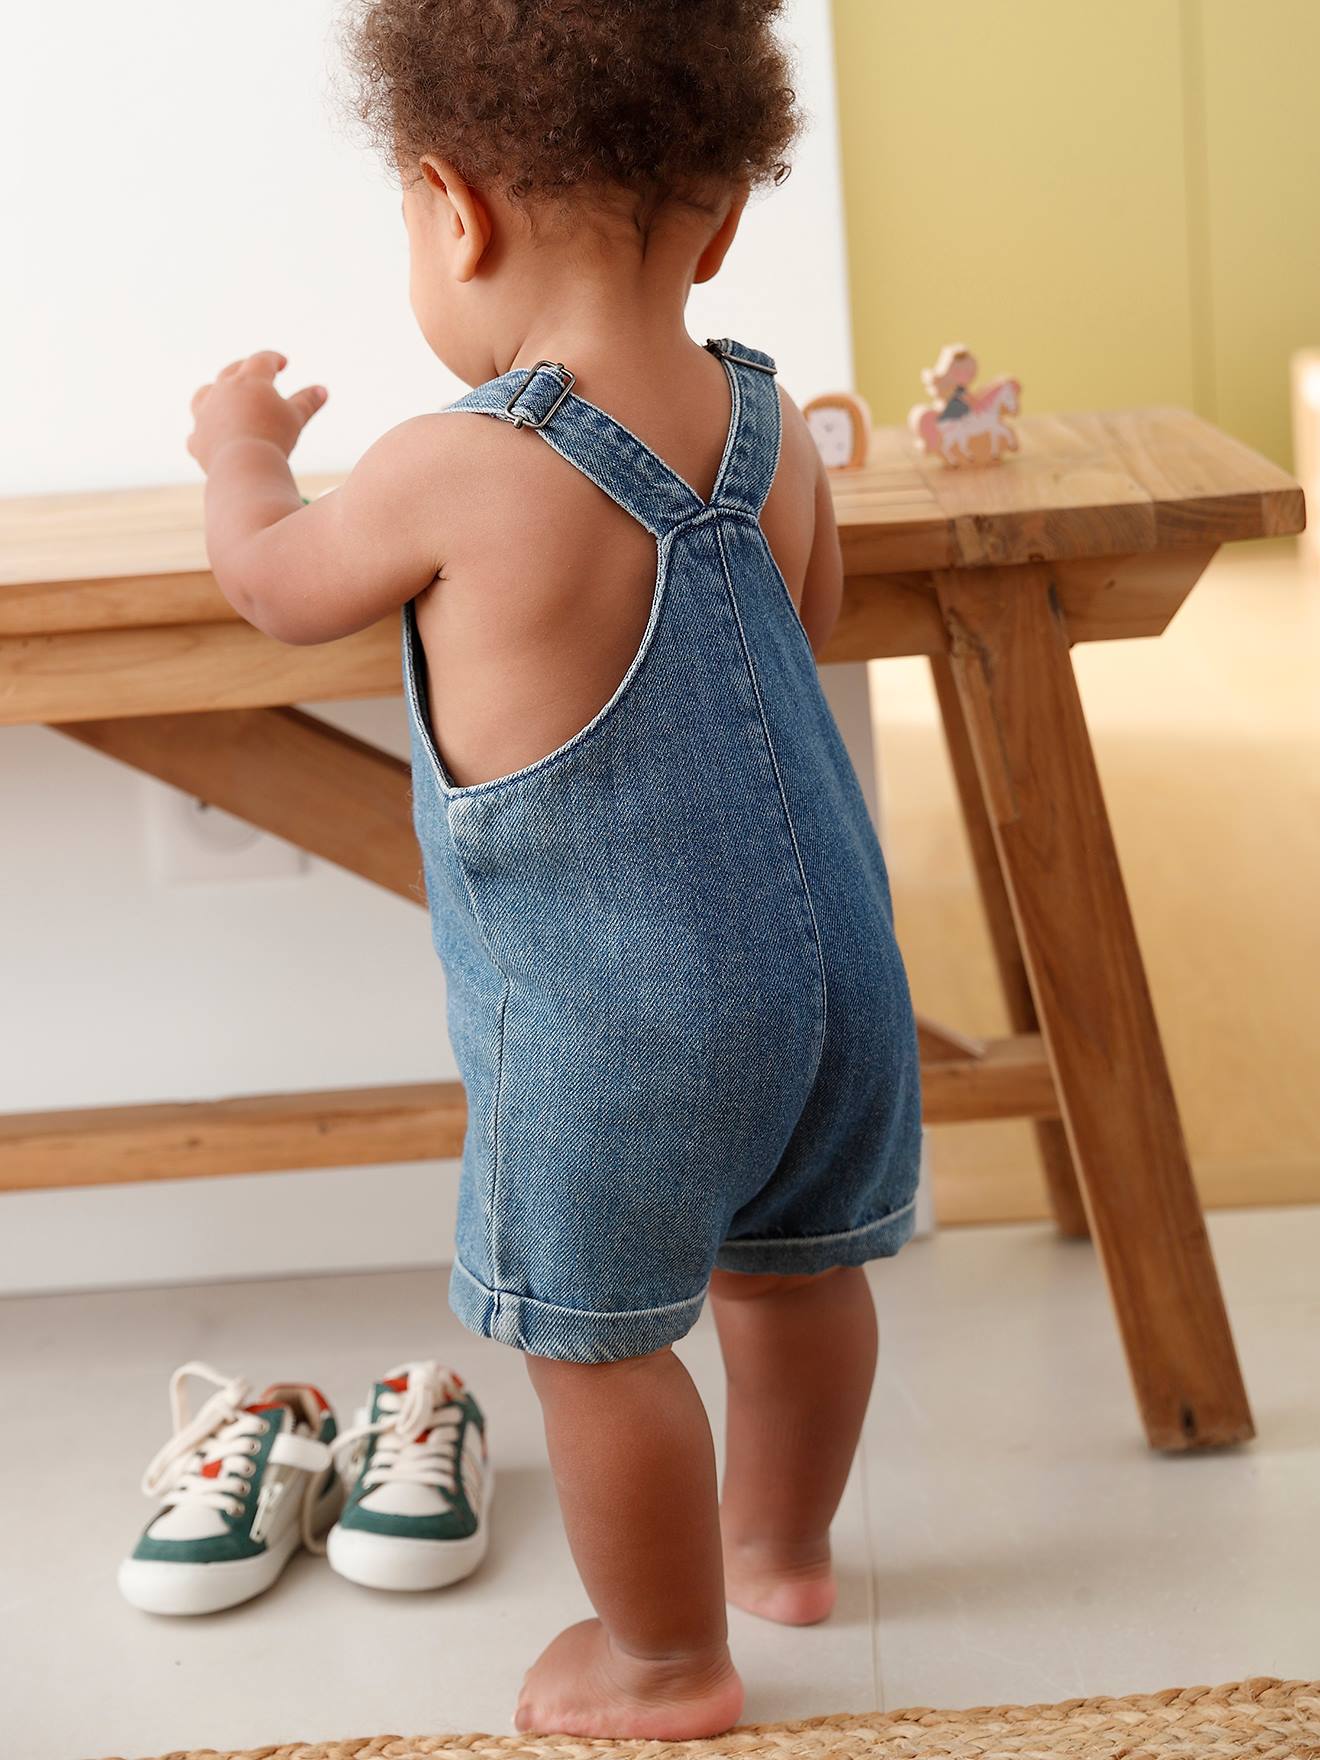 LINED DENIM DUNGAREES | Toddler boy outfits, Boy outfits, Baby boy outfits